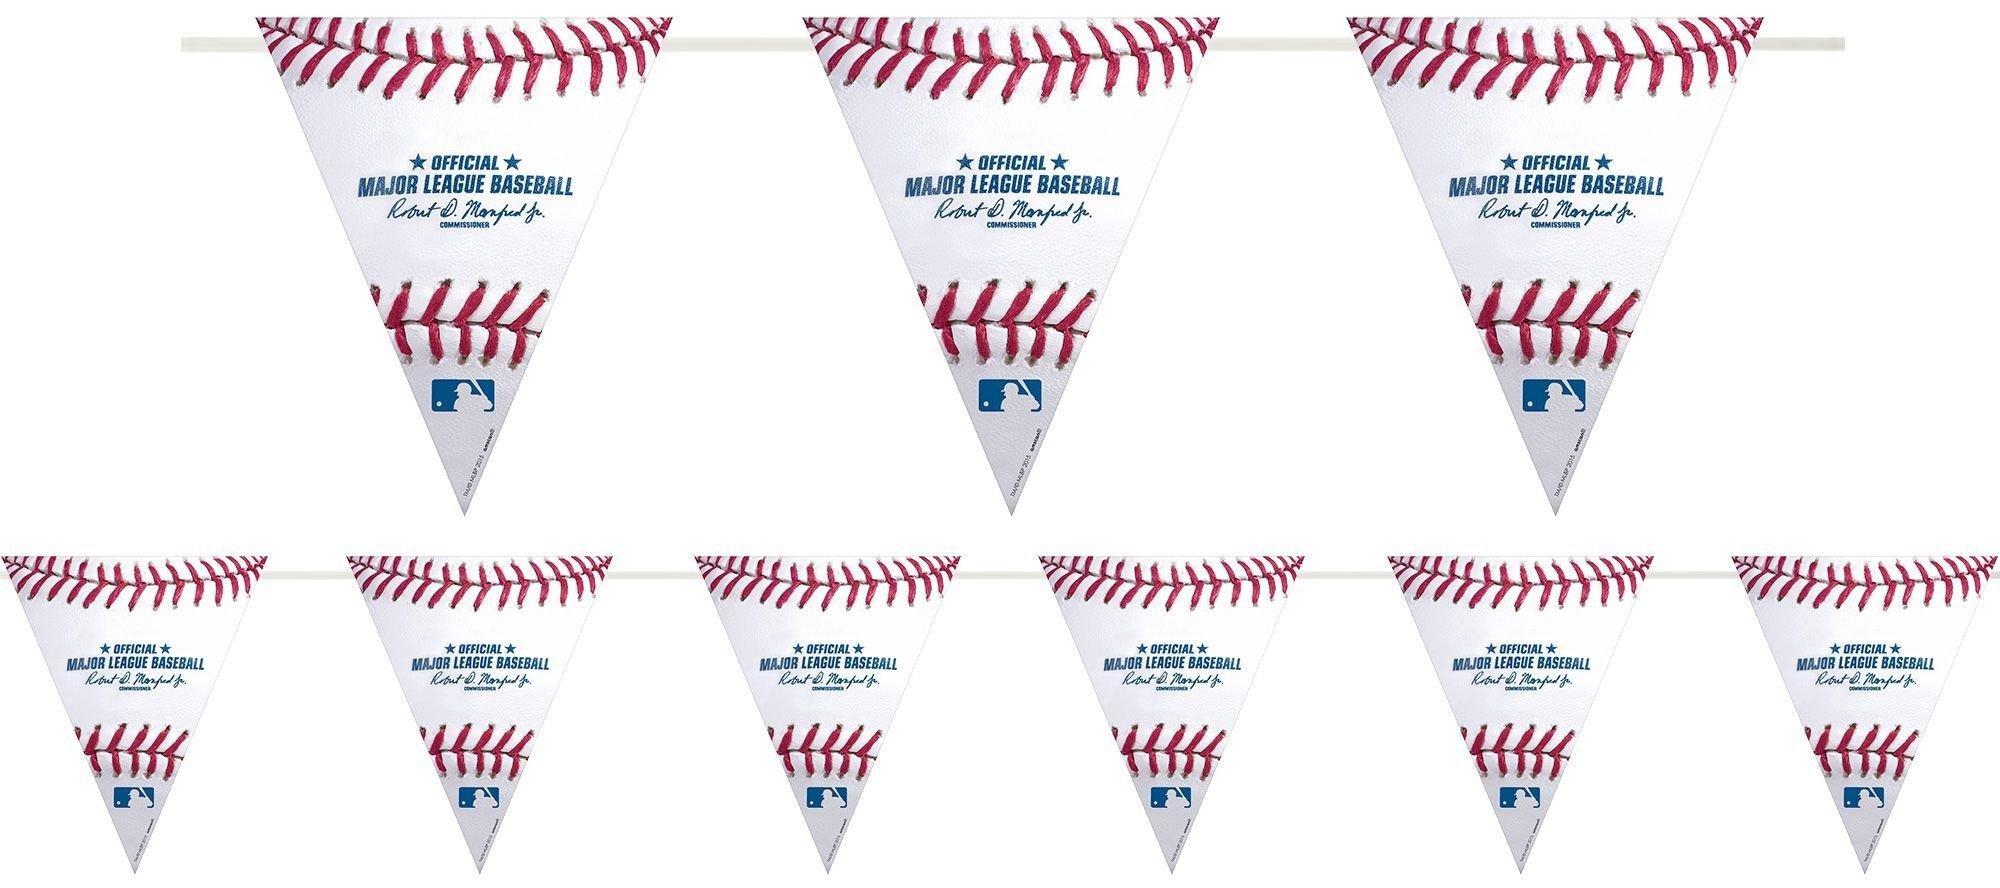 Super MLB Party Kit for 24 Guests